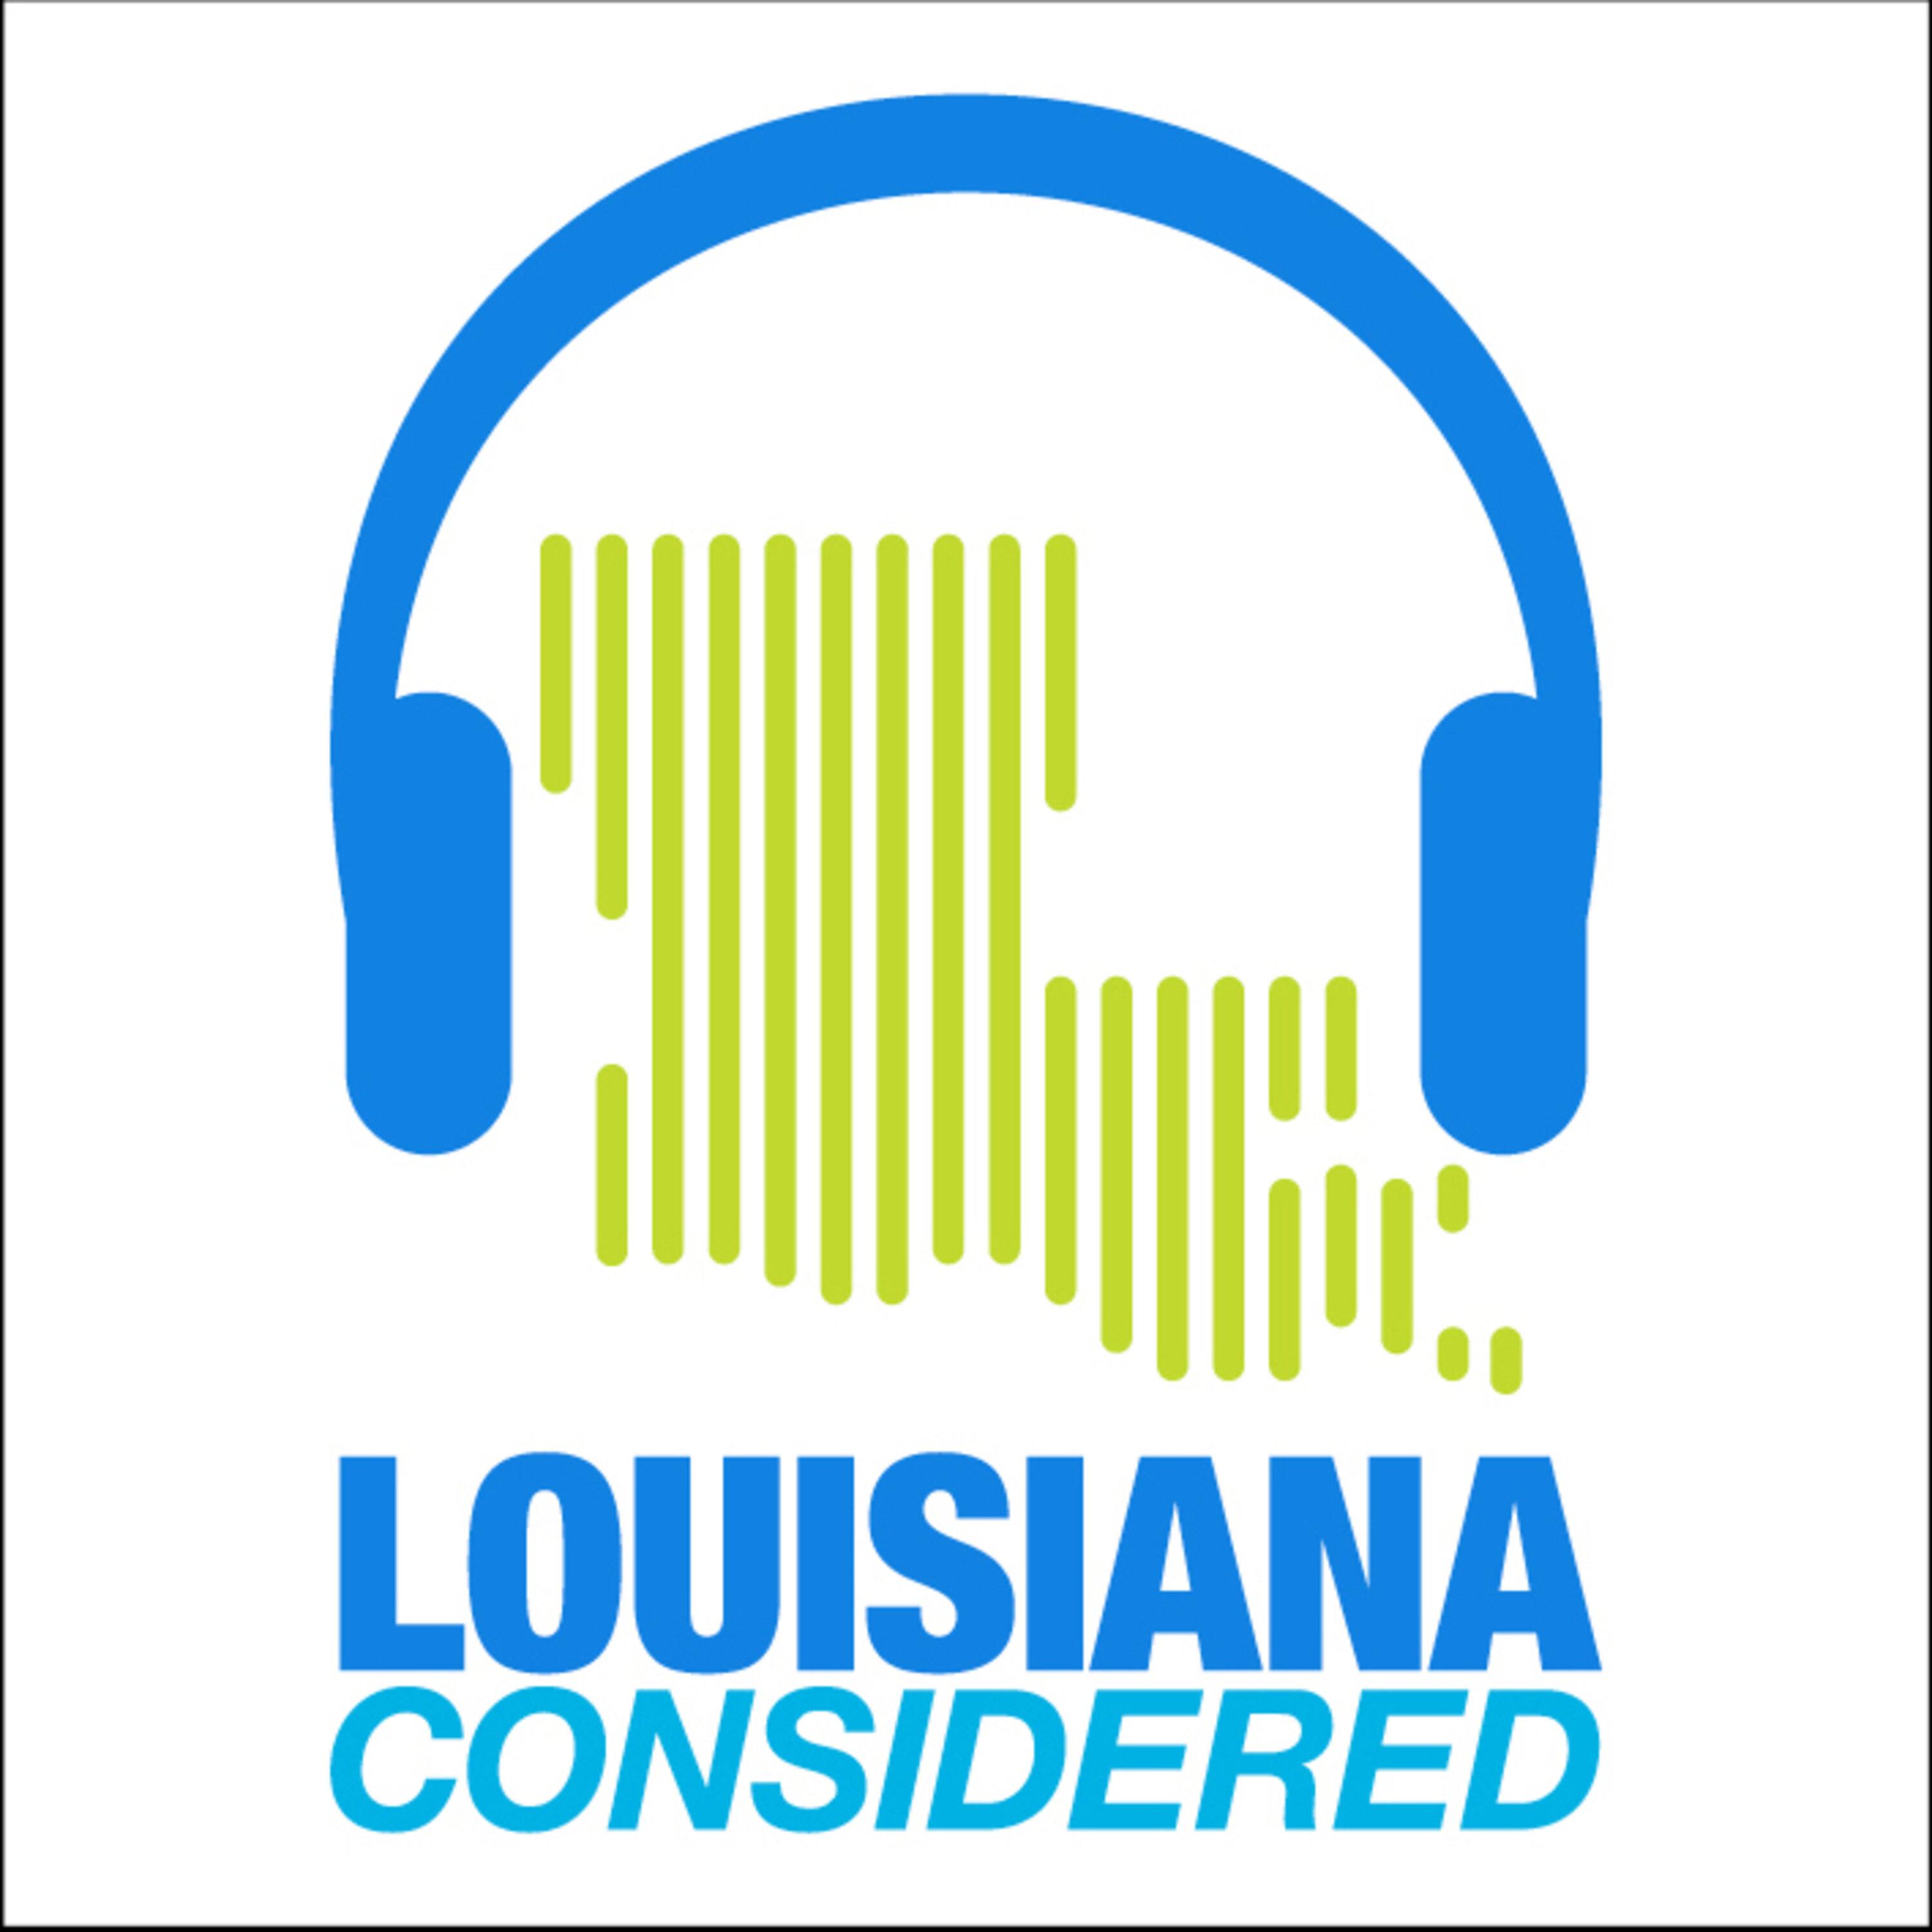 Thumbnail for "Louisiana Considered: Governor’s Climate Task Force Releases Draft Of Emissions Reduction Plan, Blue Bikes Return To NOLA Streets, Remembering Howell Binkley".